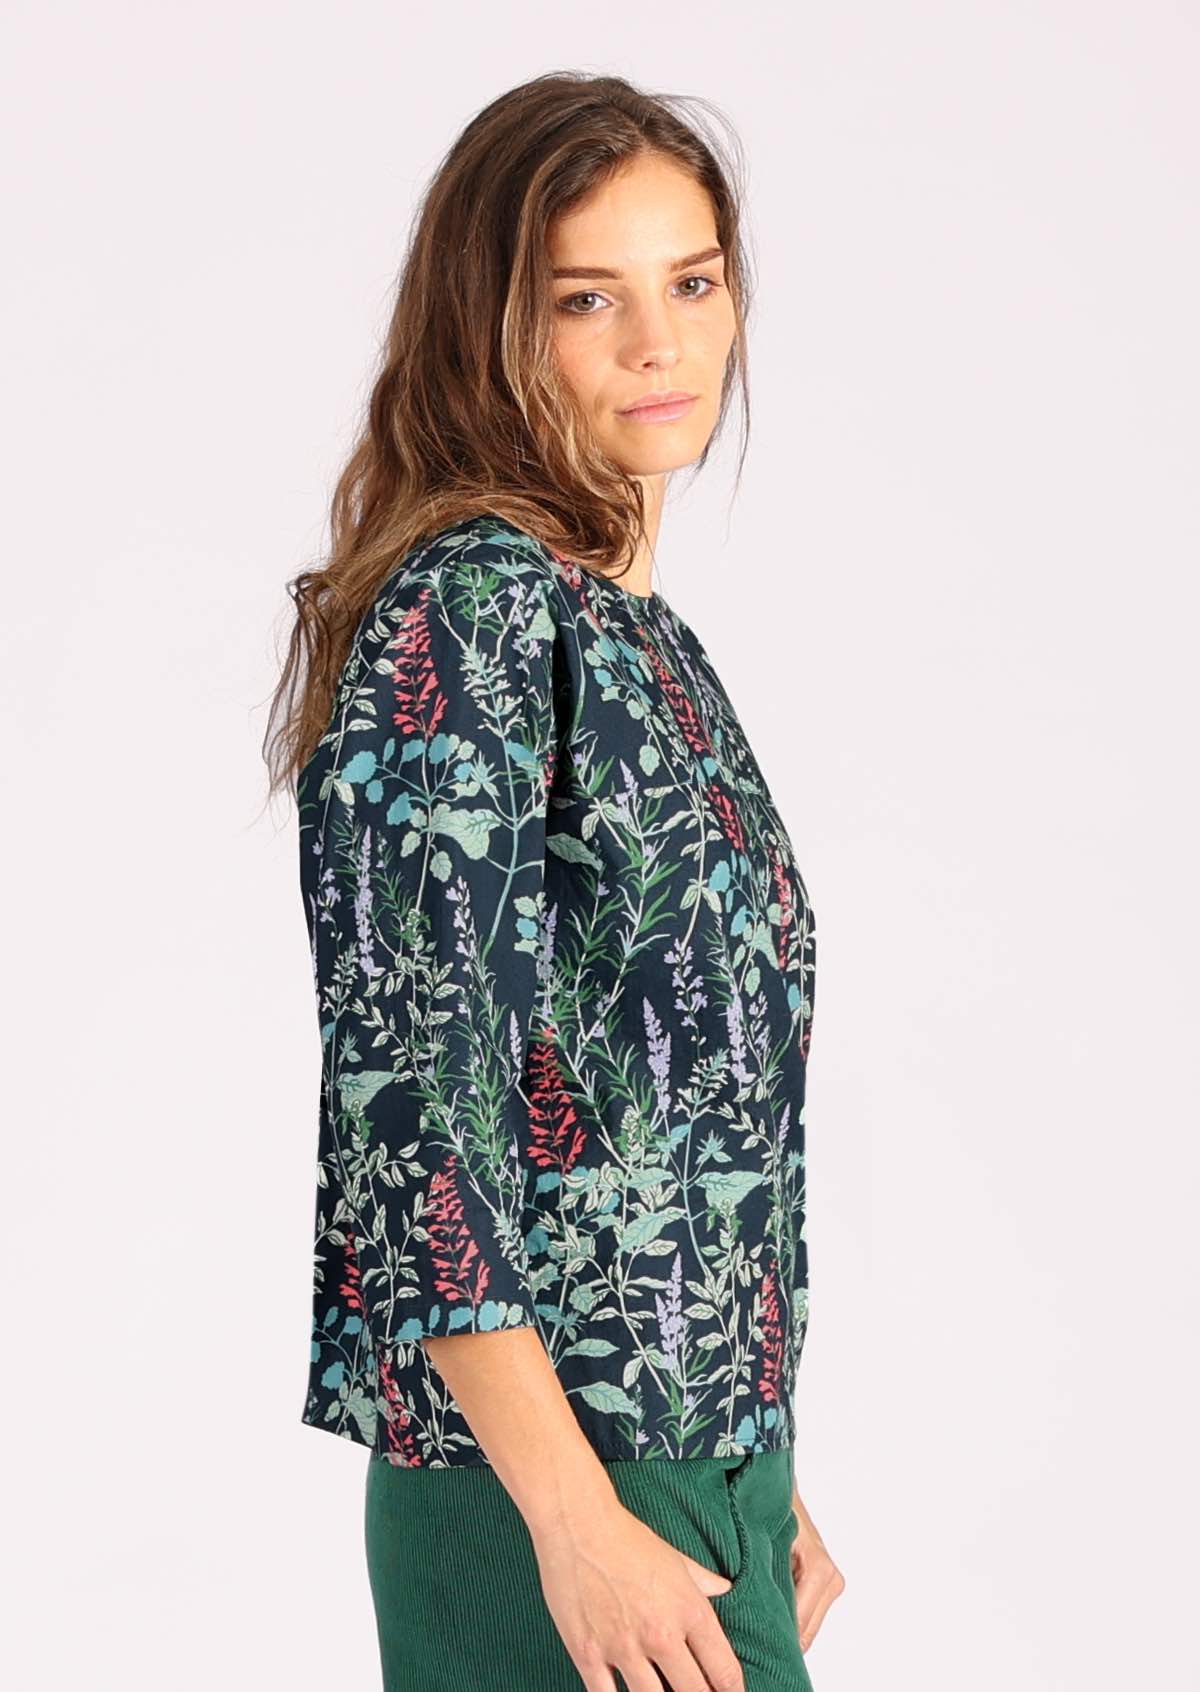 Loose fit cotton floral top with 3/4 sleeves and high round neckline